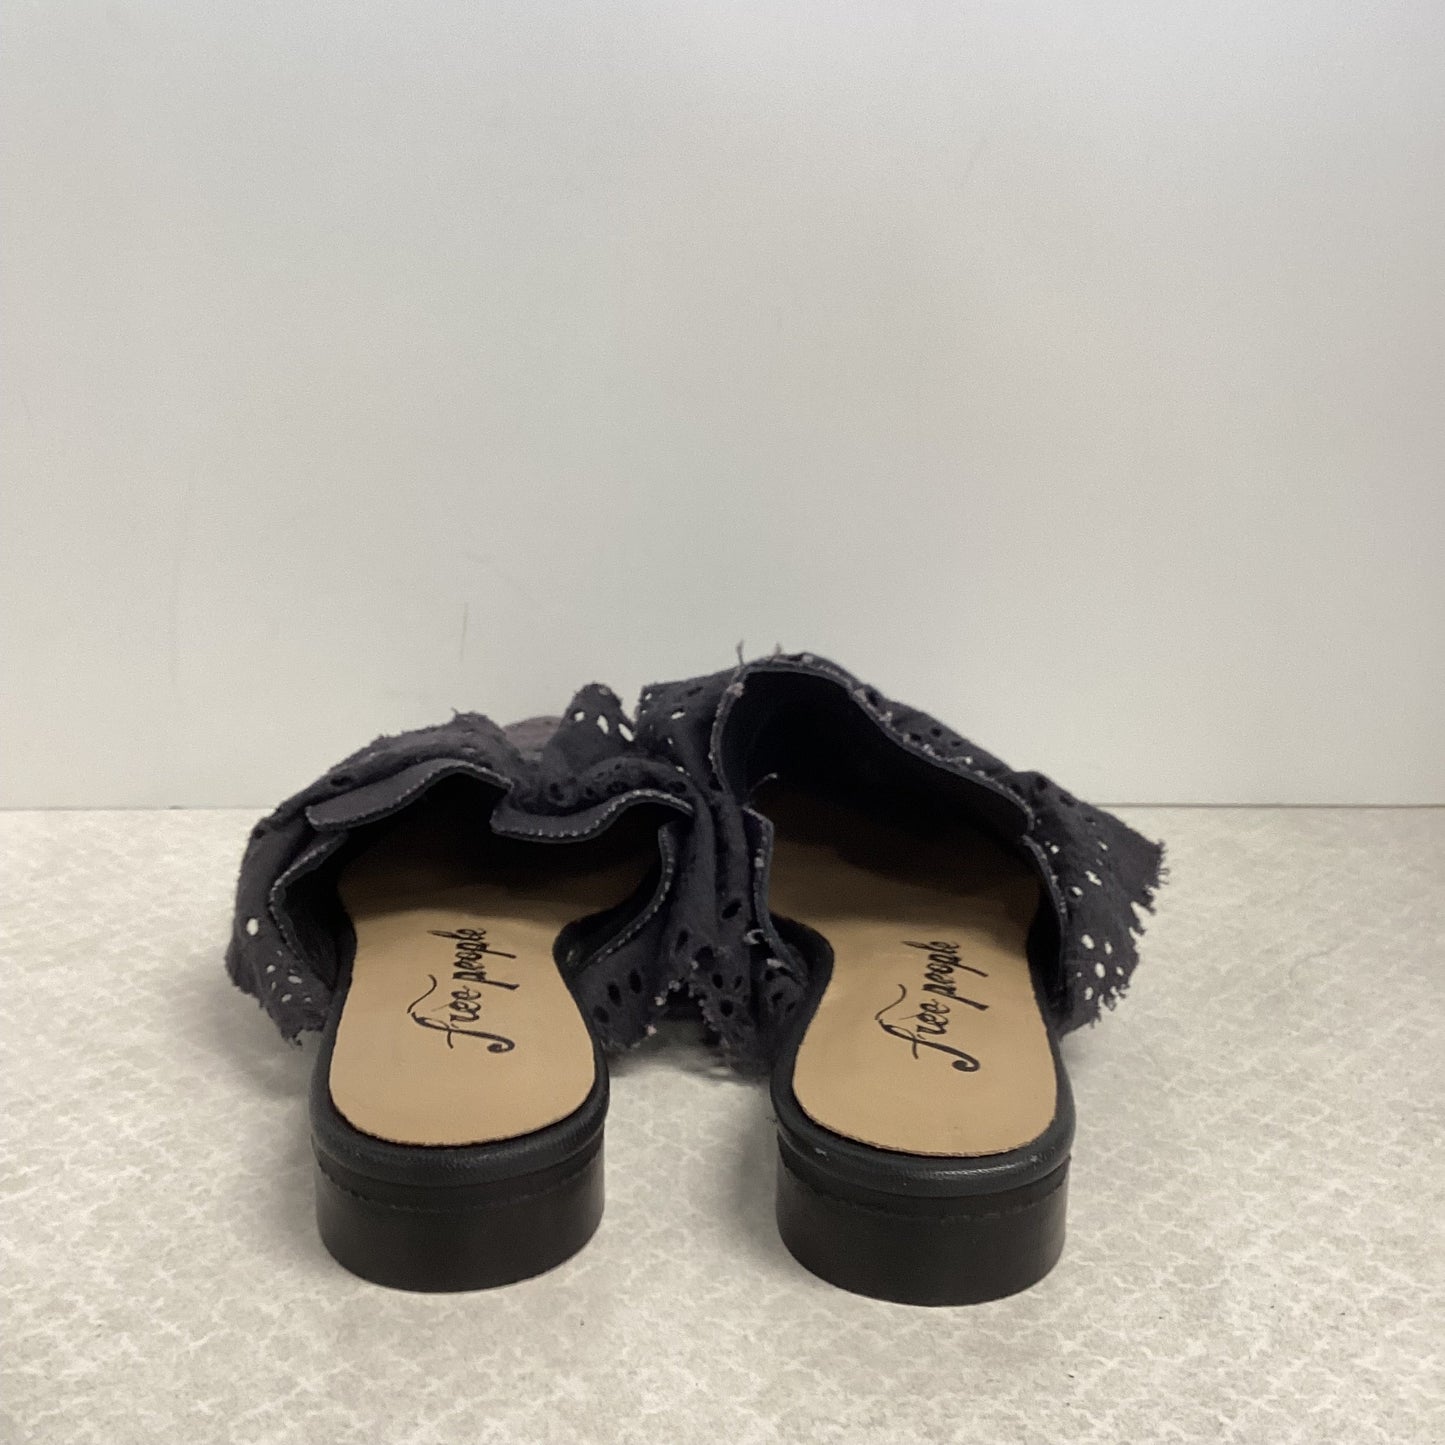 Grey Shoes Flats Free People, Size 6